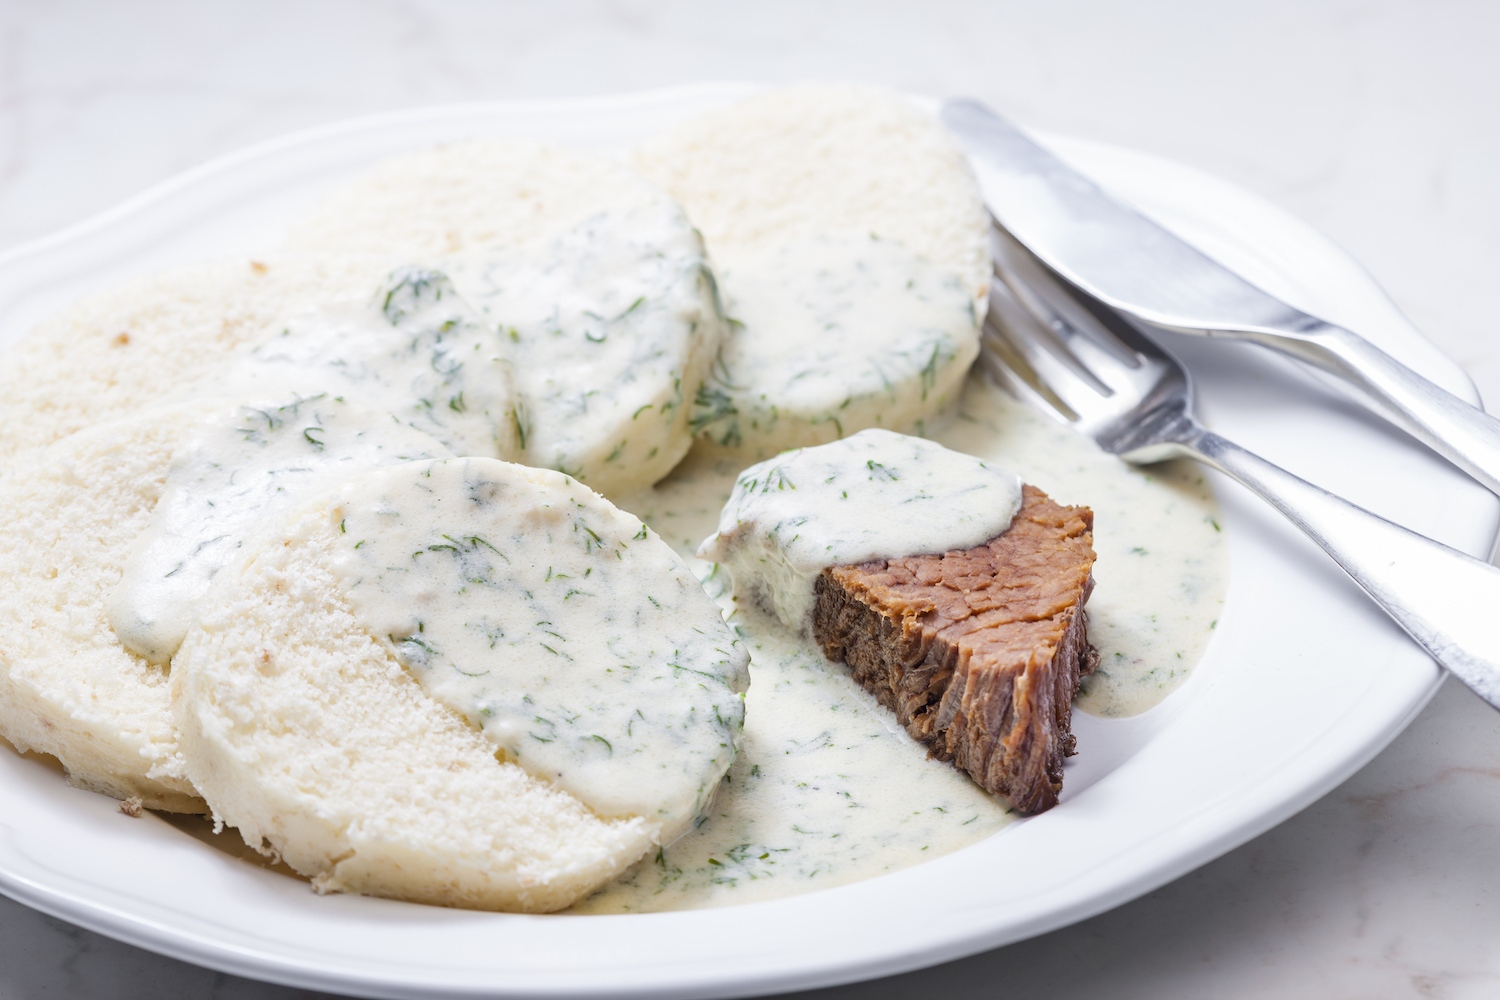 white dill sauce over meat and dumplings